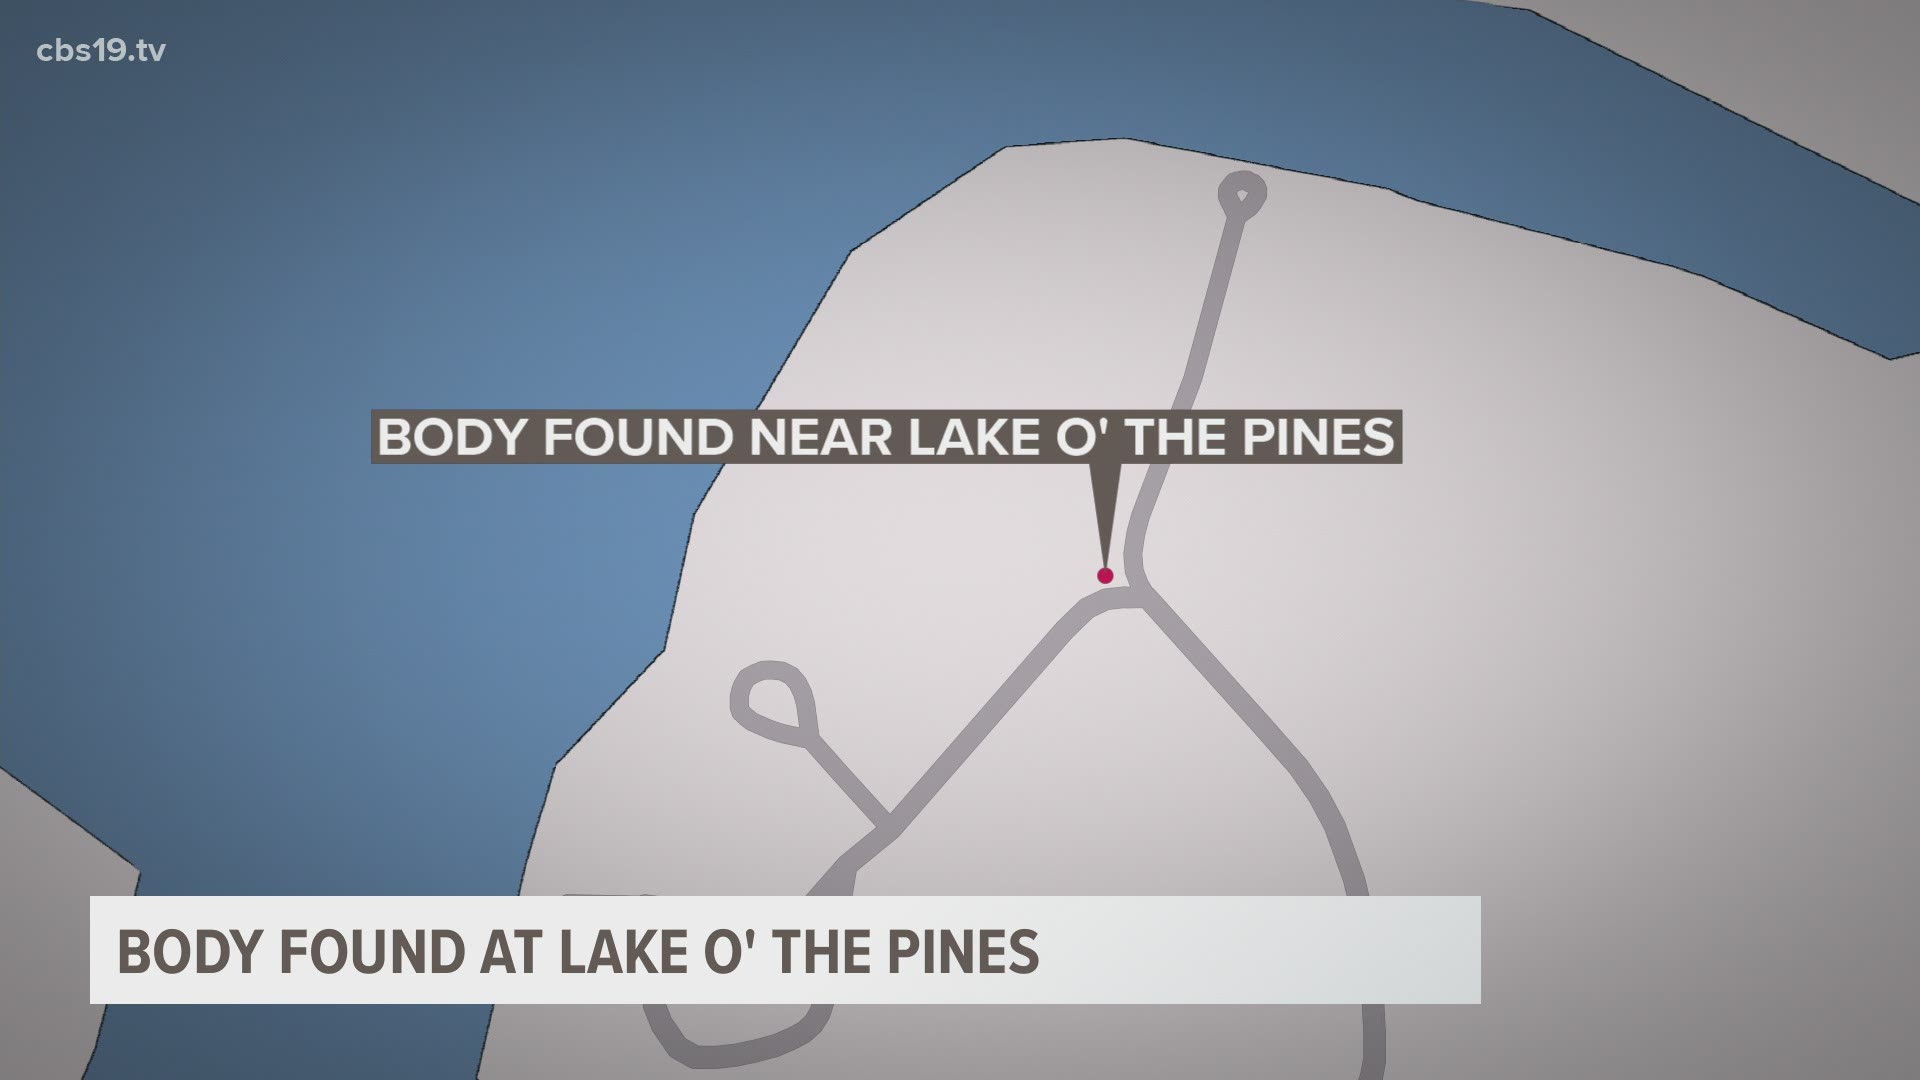 Marion County Sheriff's Office officials believe the body found by a fisherman Monday afternoon at Lake O' the Pines might be the man reported missing in the area.